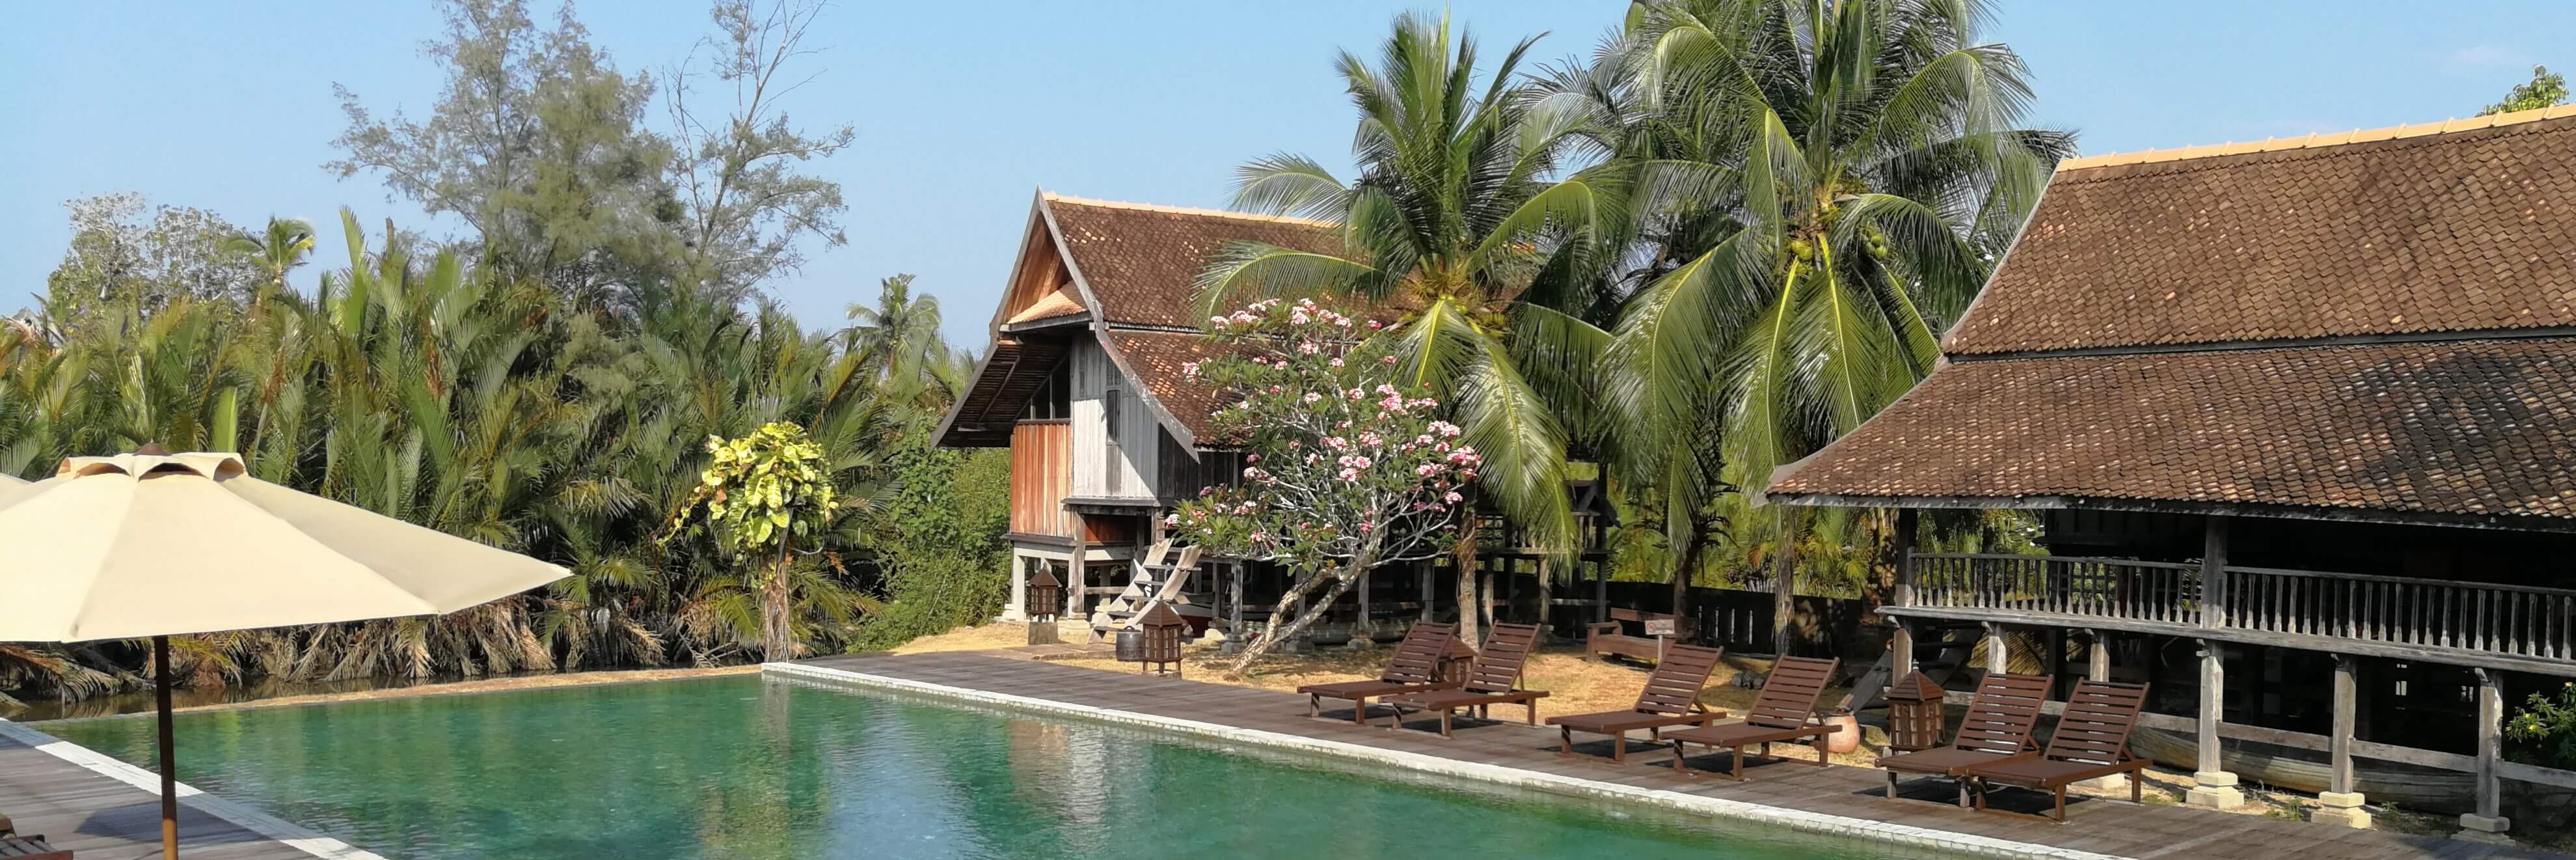 A swimming pool in a courtyard surrounding by restored classic Malay villas at Terrapuri Heritage Village